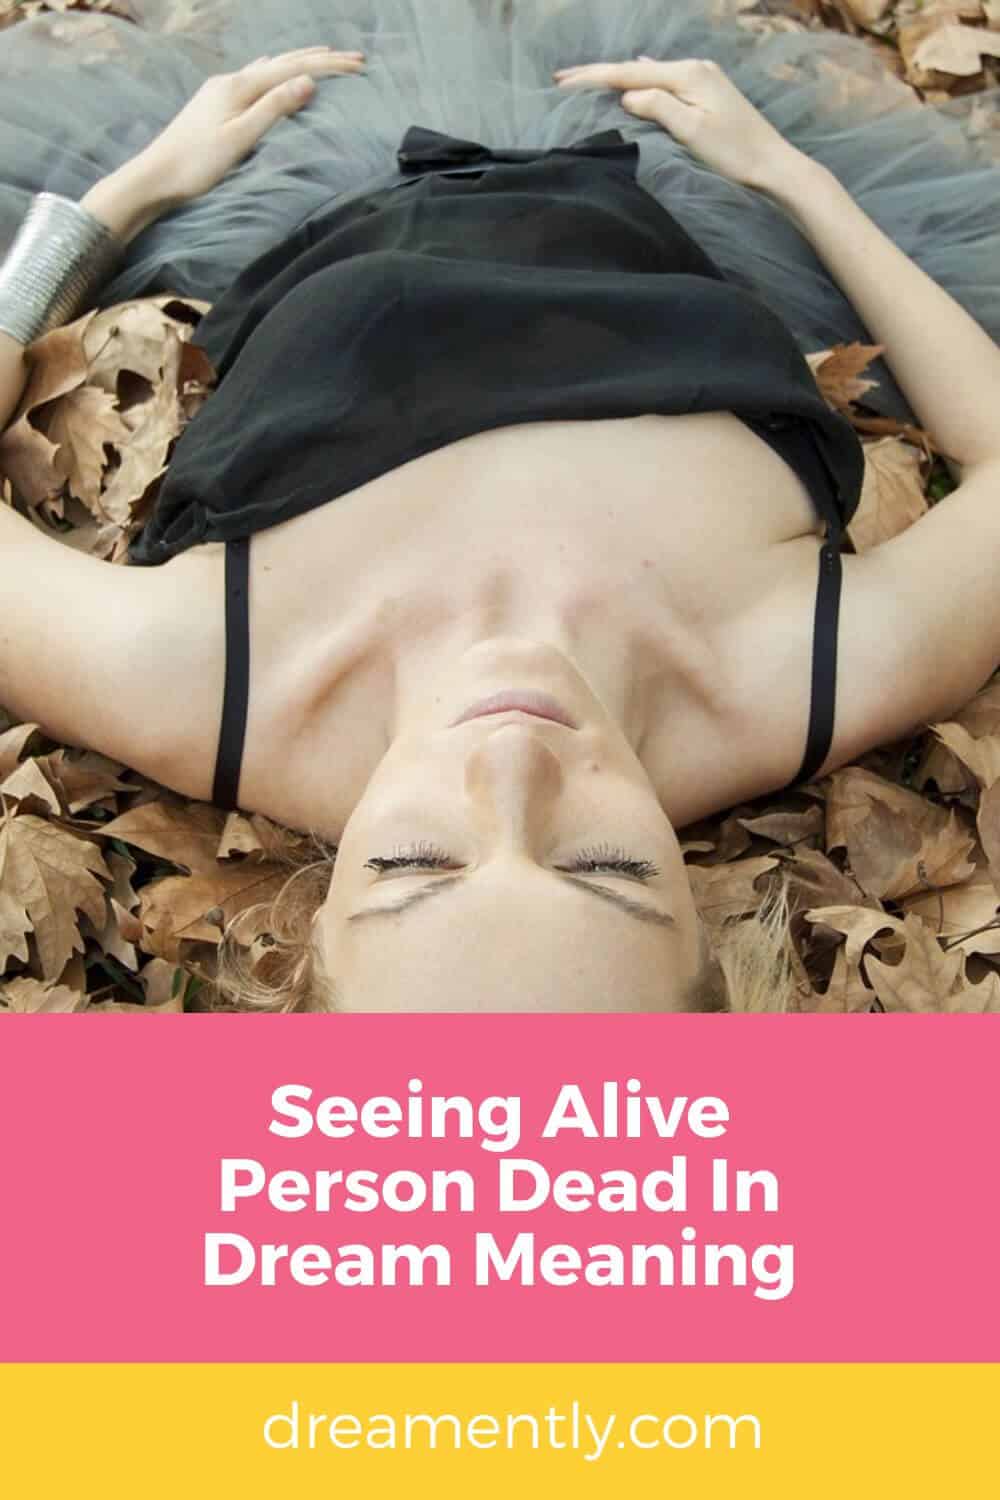 Seeing Alive Person Dead In Dream Meaning (2)